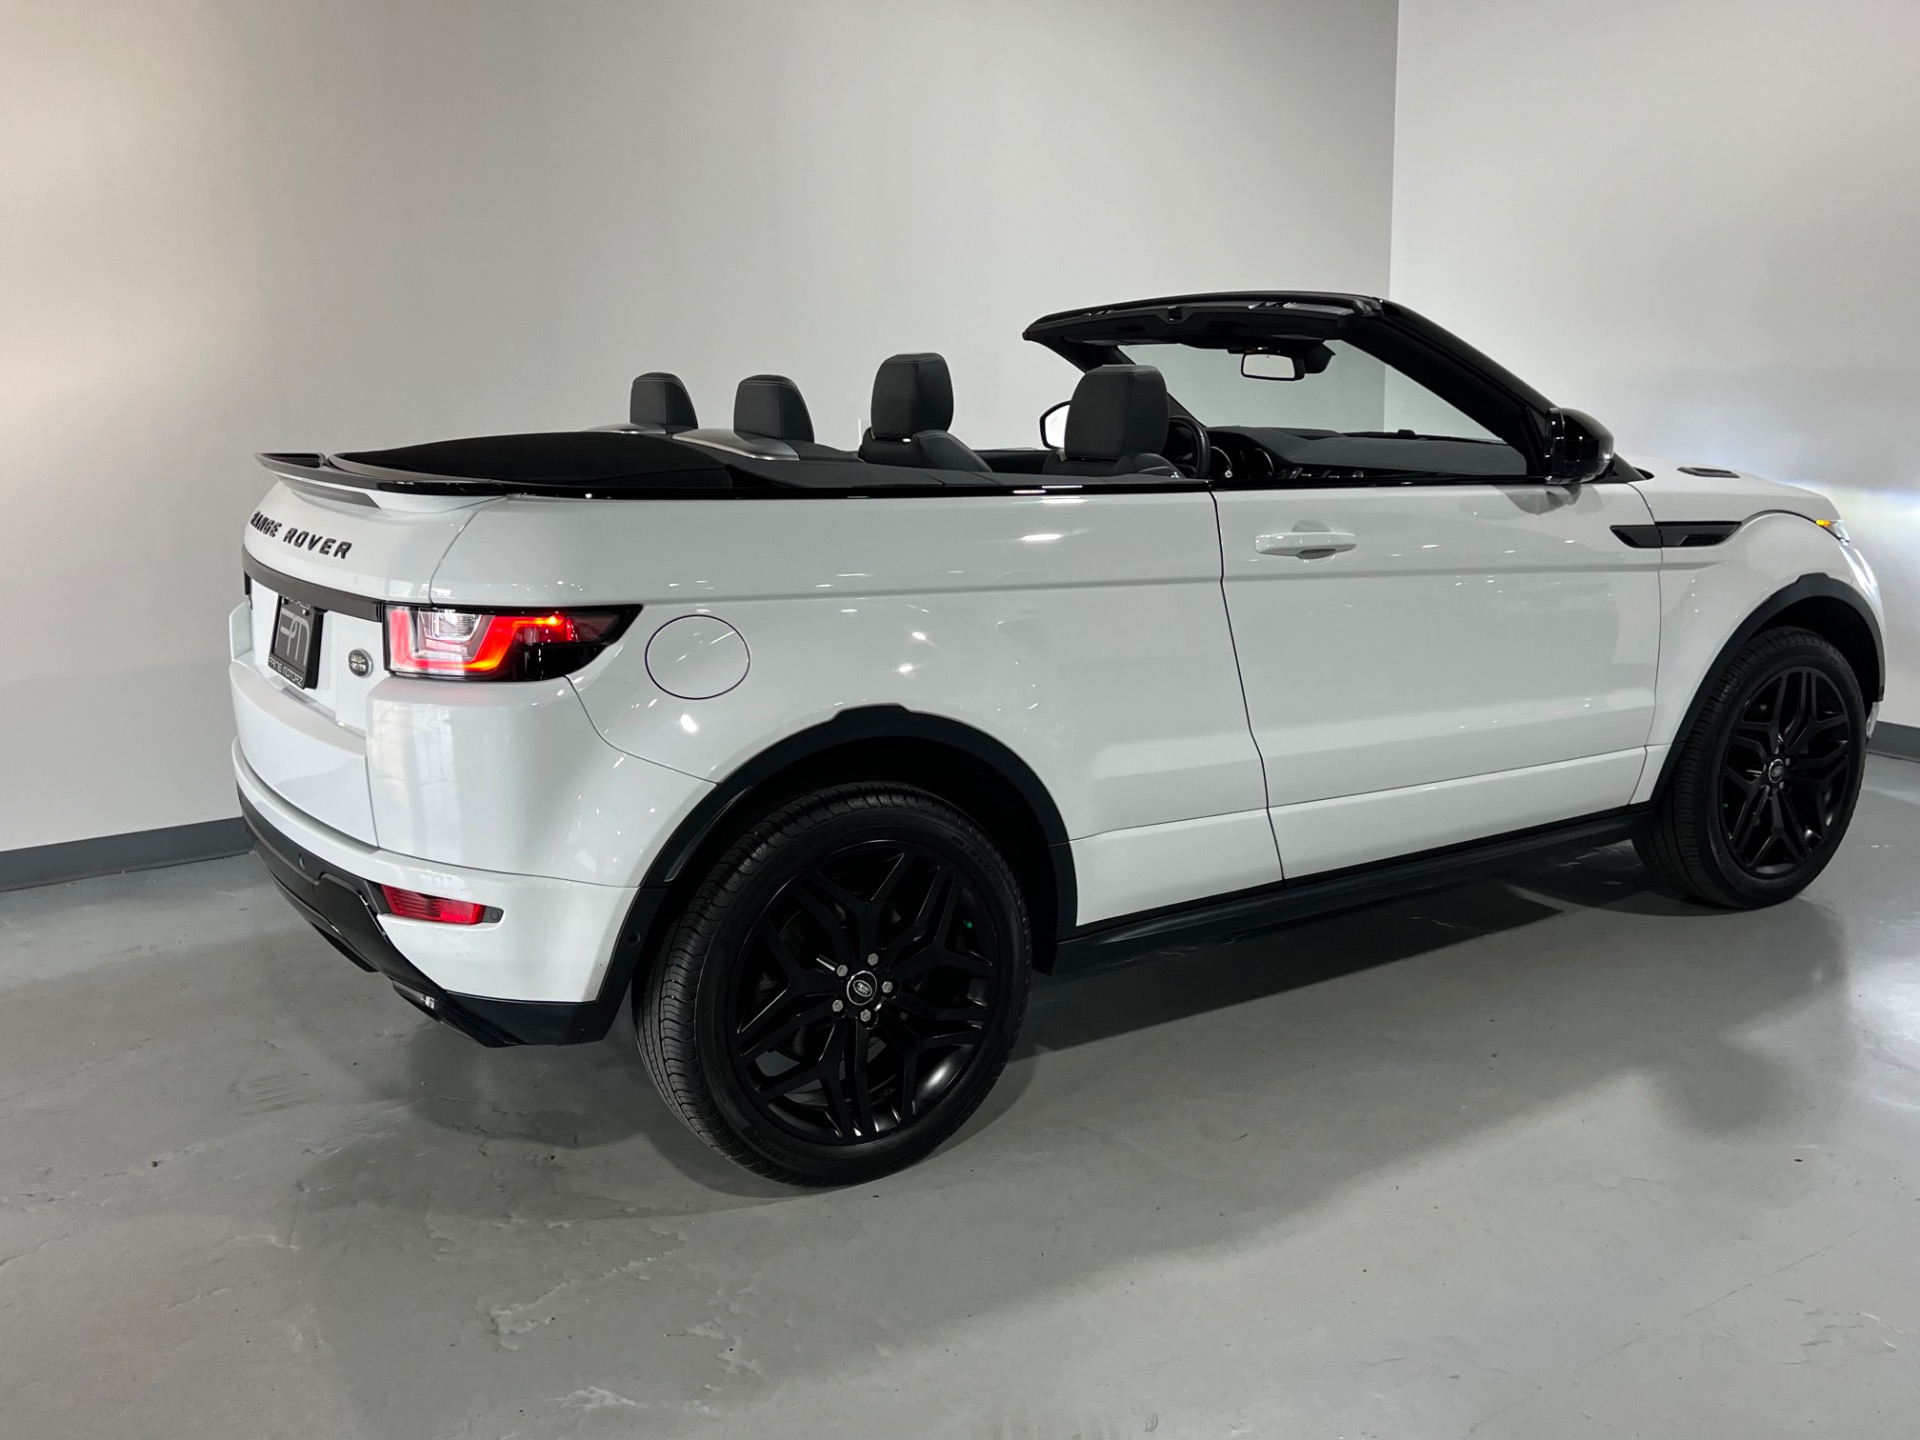 HSE Land Fuji Convertible DYNAMIC (Sold) Motorz Prime AWD HSE | Stock Rover #4387 Sale Used Evoque 2DR White Dynamic For Rover 2019 Range